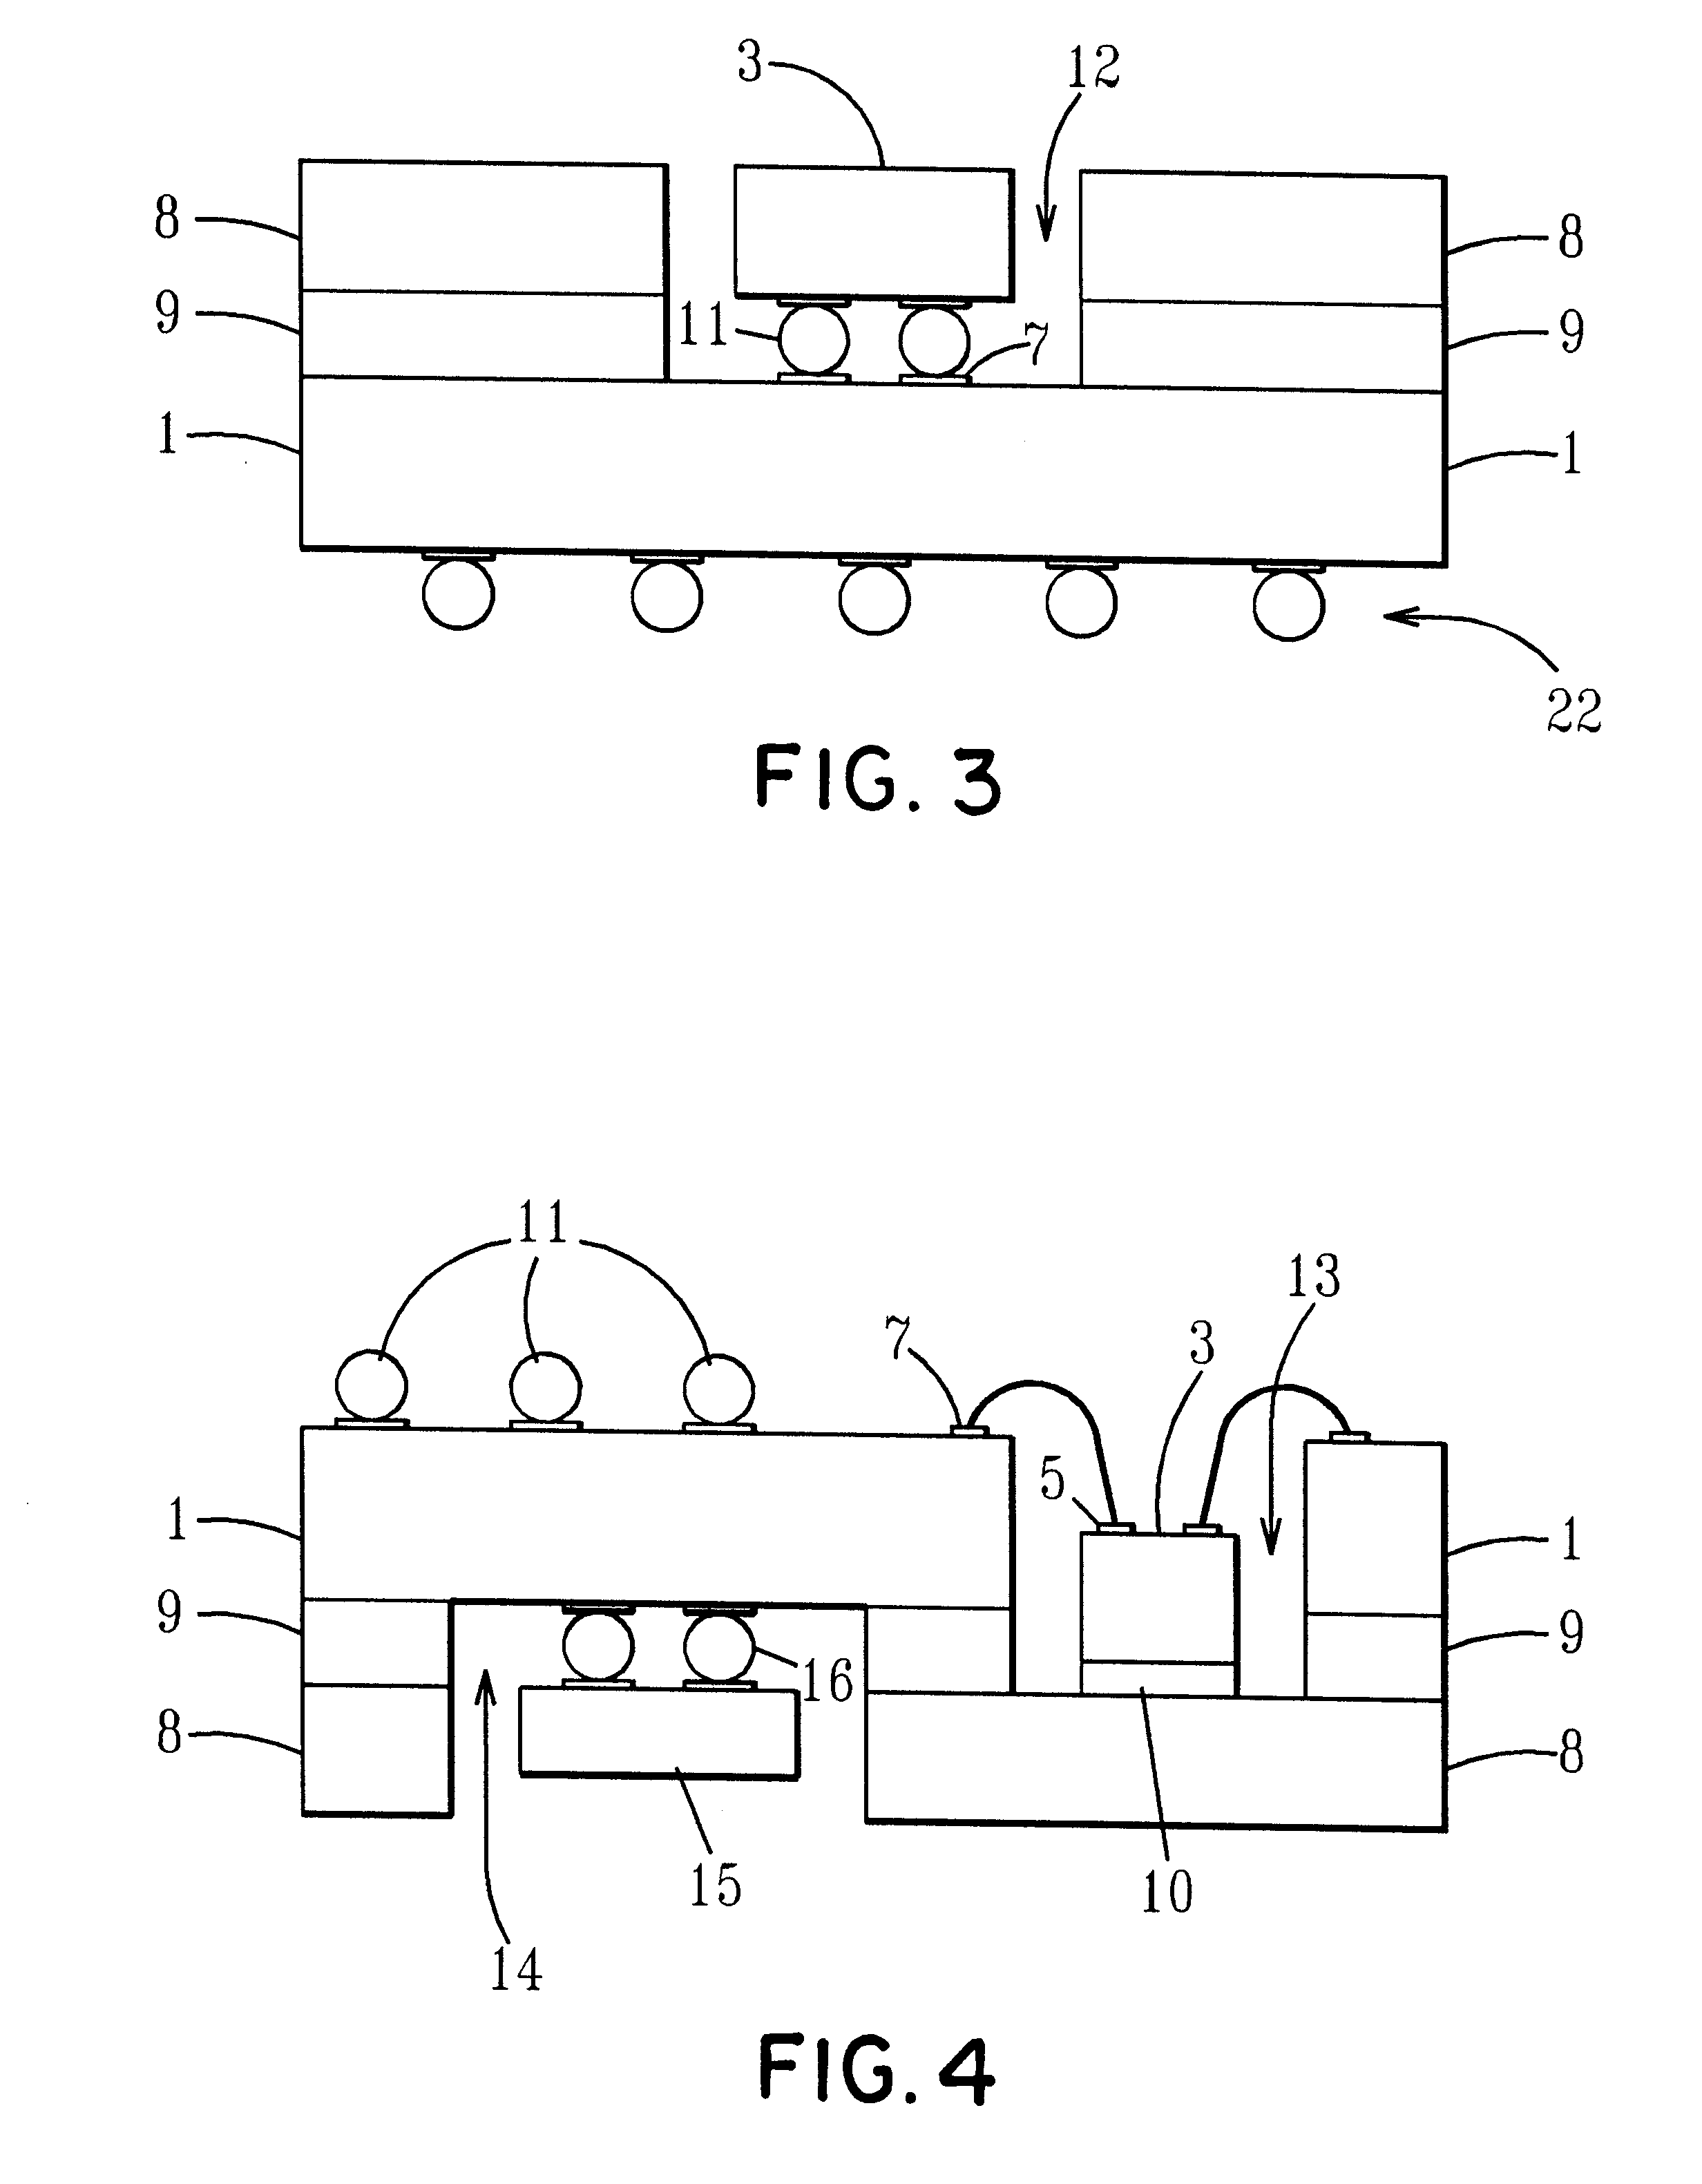 Integrated circuit chip carrier assembly comprising a stiffener attached to a dielectric substrate